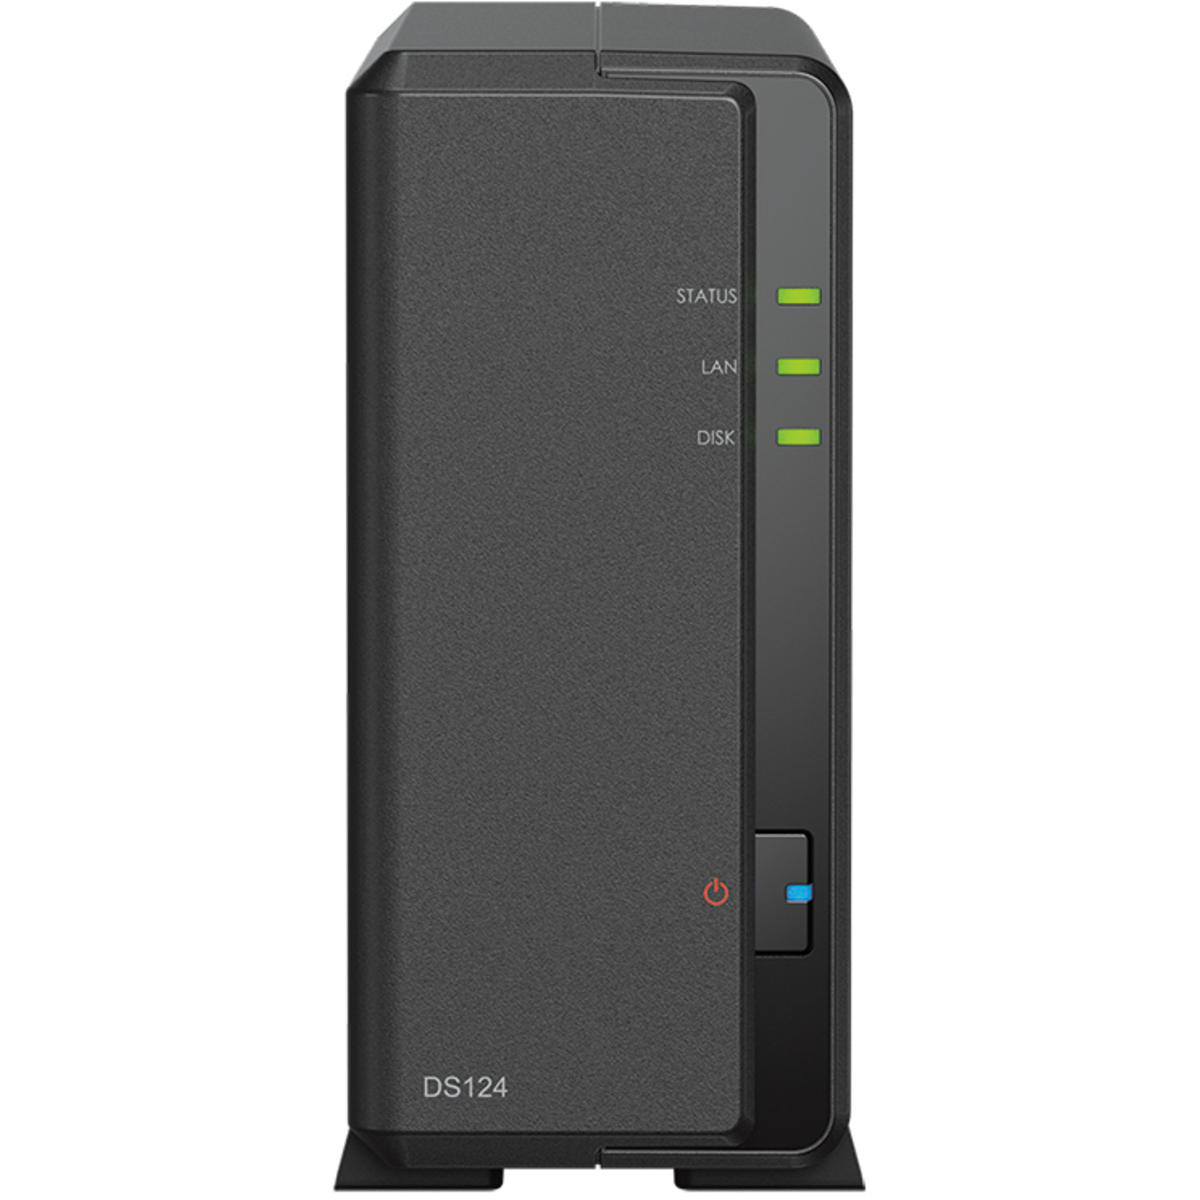 buy Synology DiskStation DS124 16tb Desktop NAS - Network Attached Storage Device 1x16000gb Western Digital Ultrastar DC HC550 WUH721816ALE6L4 3.5 7200rpm SATA 6Gb/s HDD ENTERPRISE Class Drives Installed - Burn-In Tested - nas headquarters buy network attached storage server device das new raid-5 free shipping simply usa DiskStation DS124